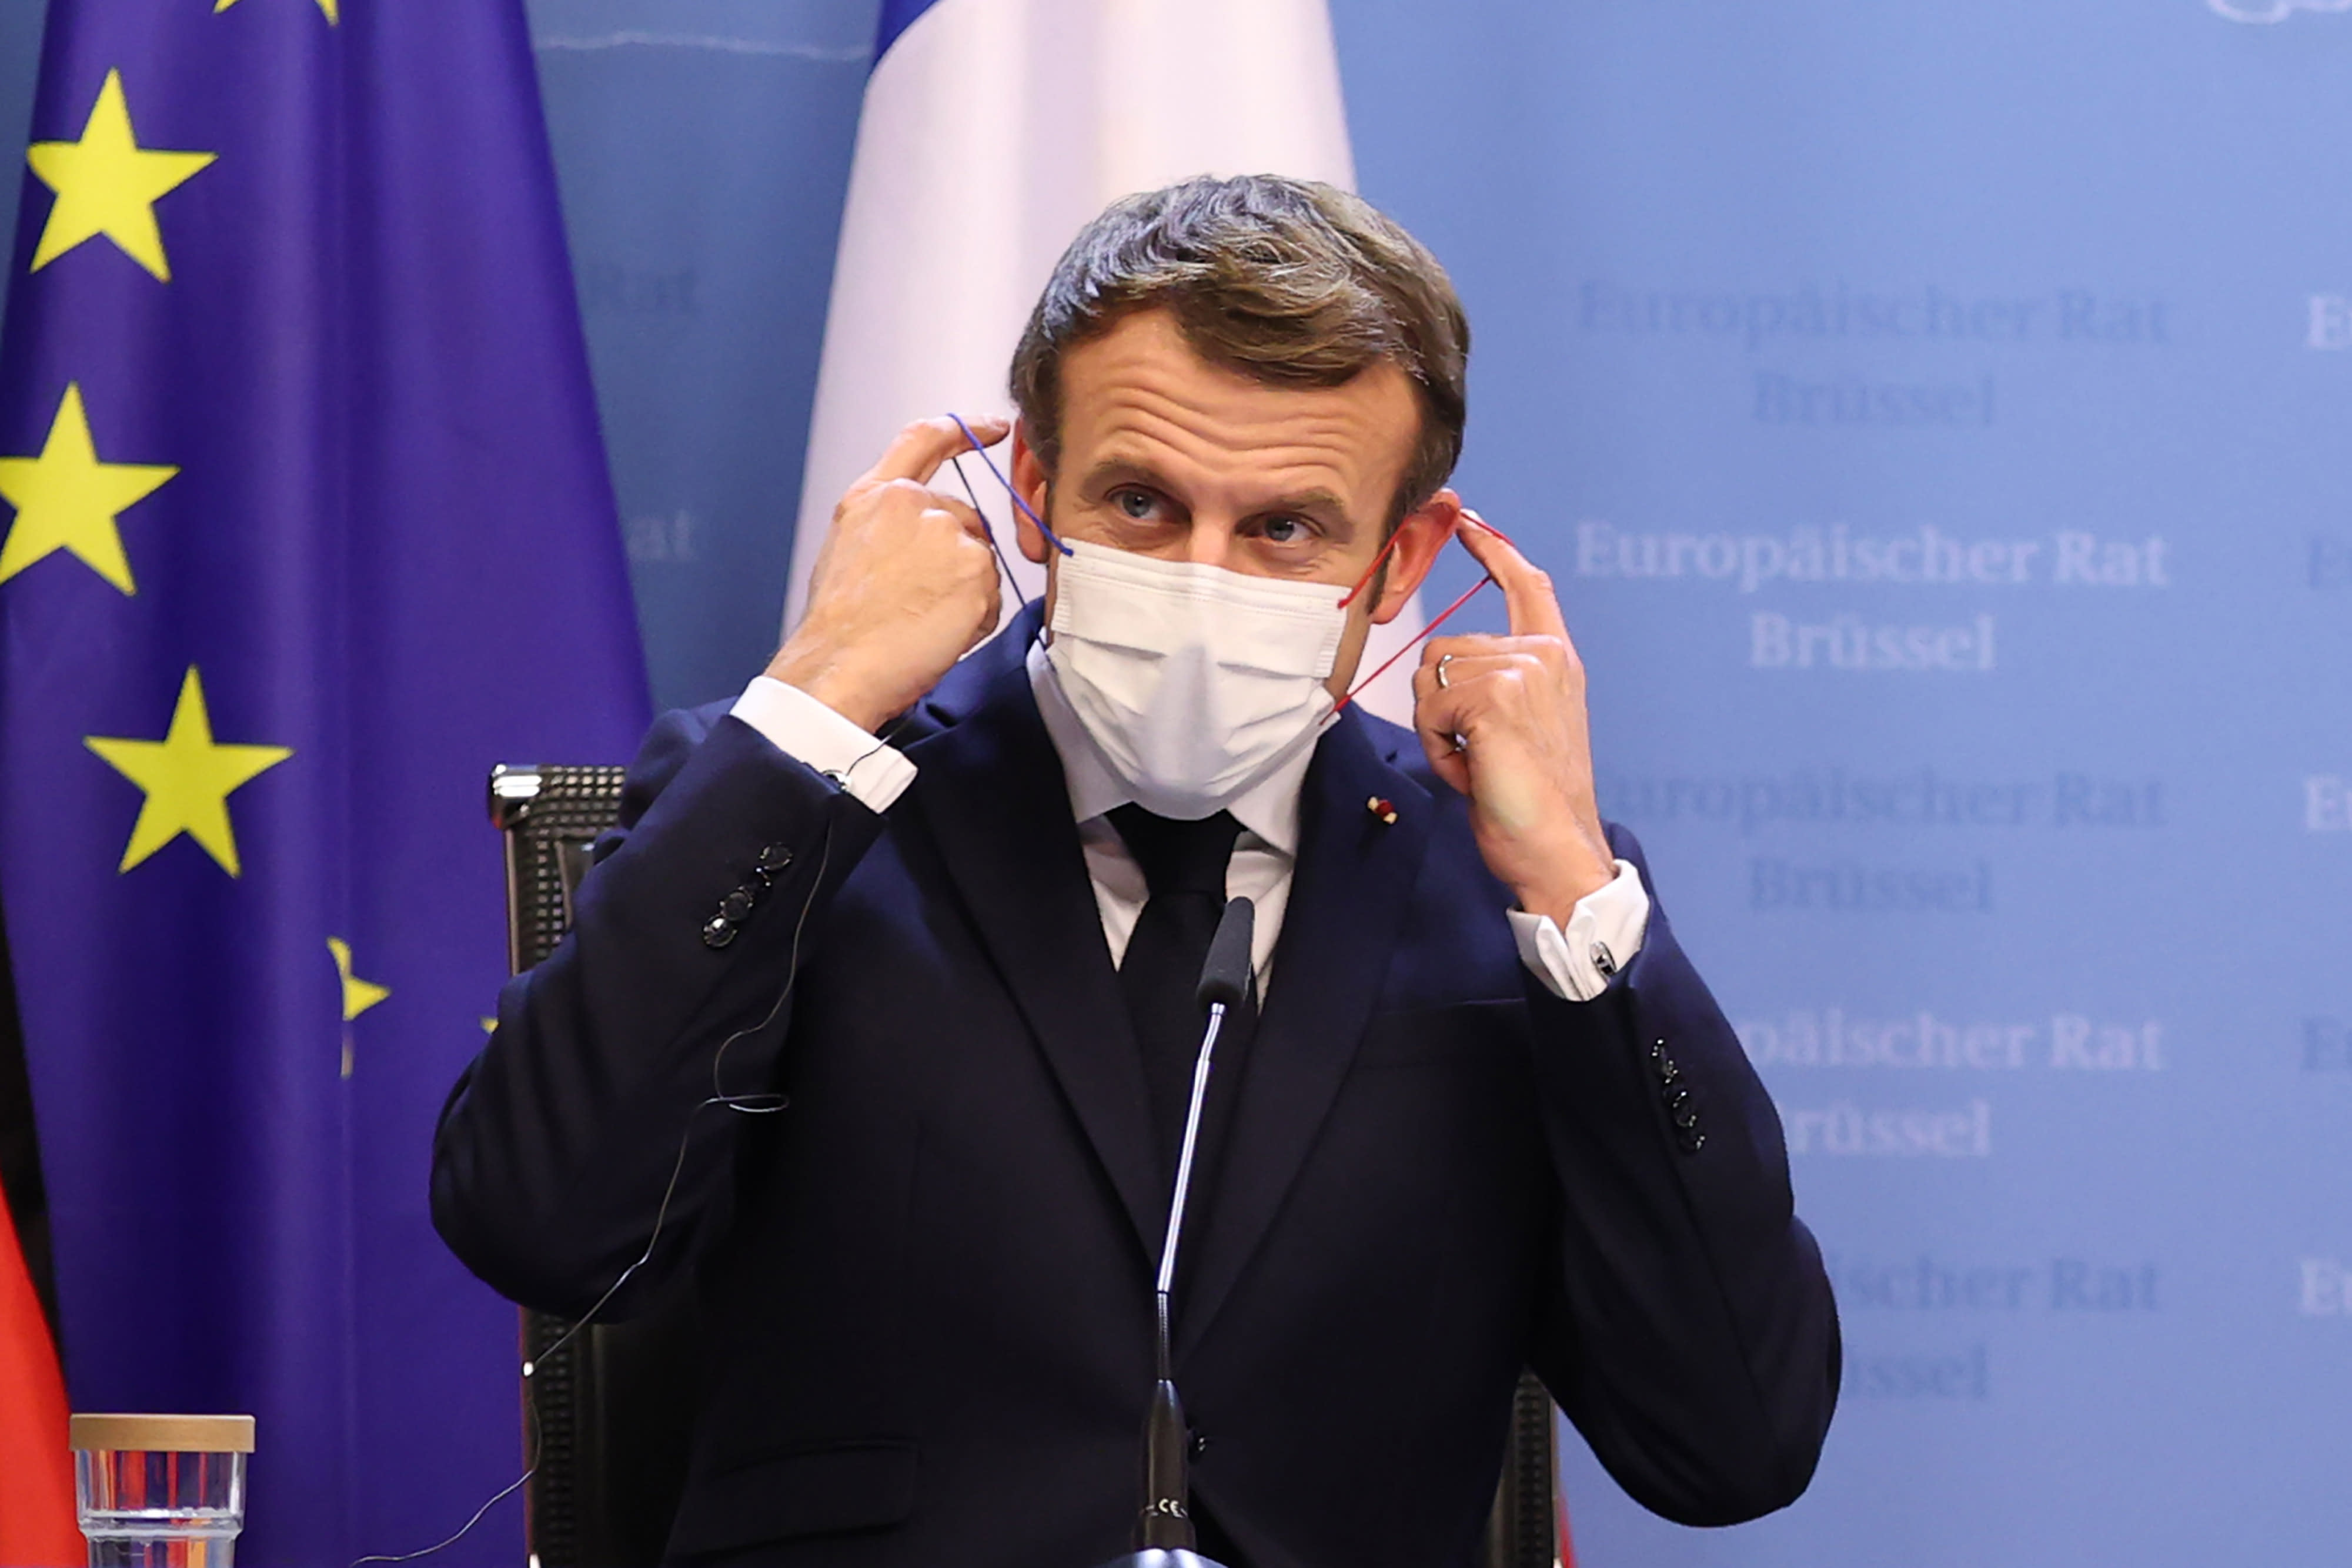 France’s Macron sparks outrage as he vows to annoy the unvaccinated